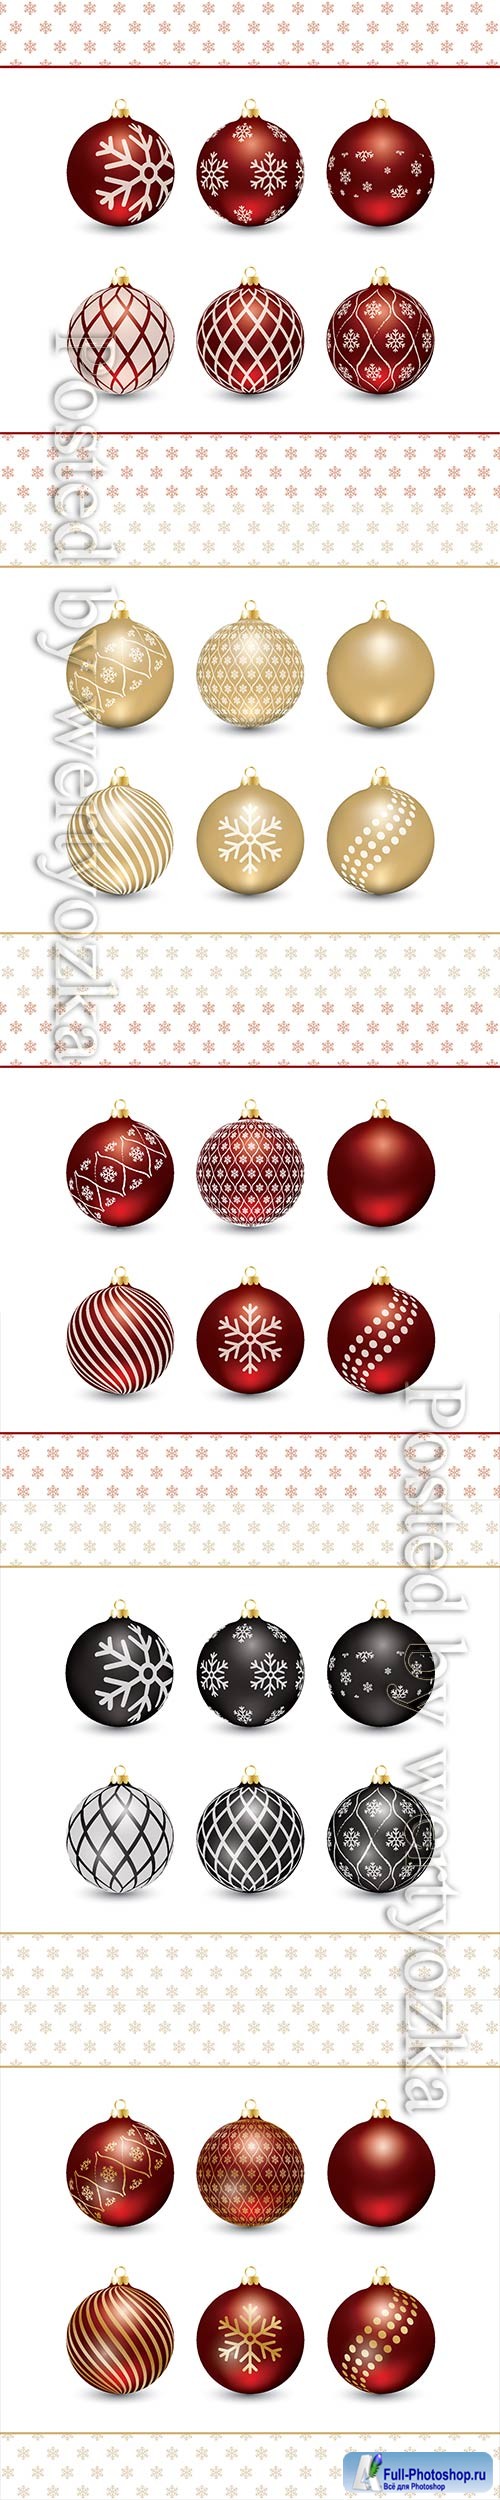 Christmas balls with ornaments decorations in gold